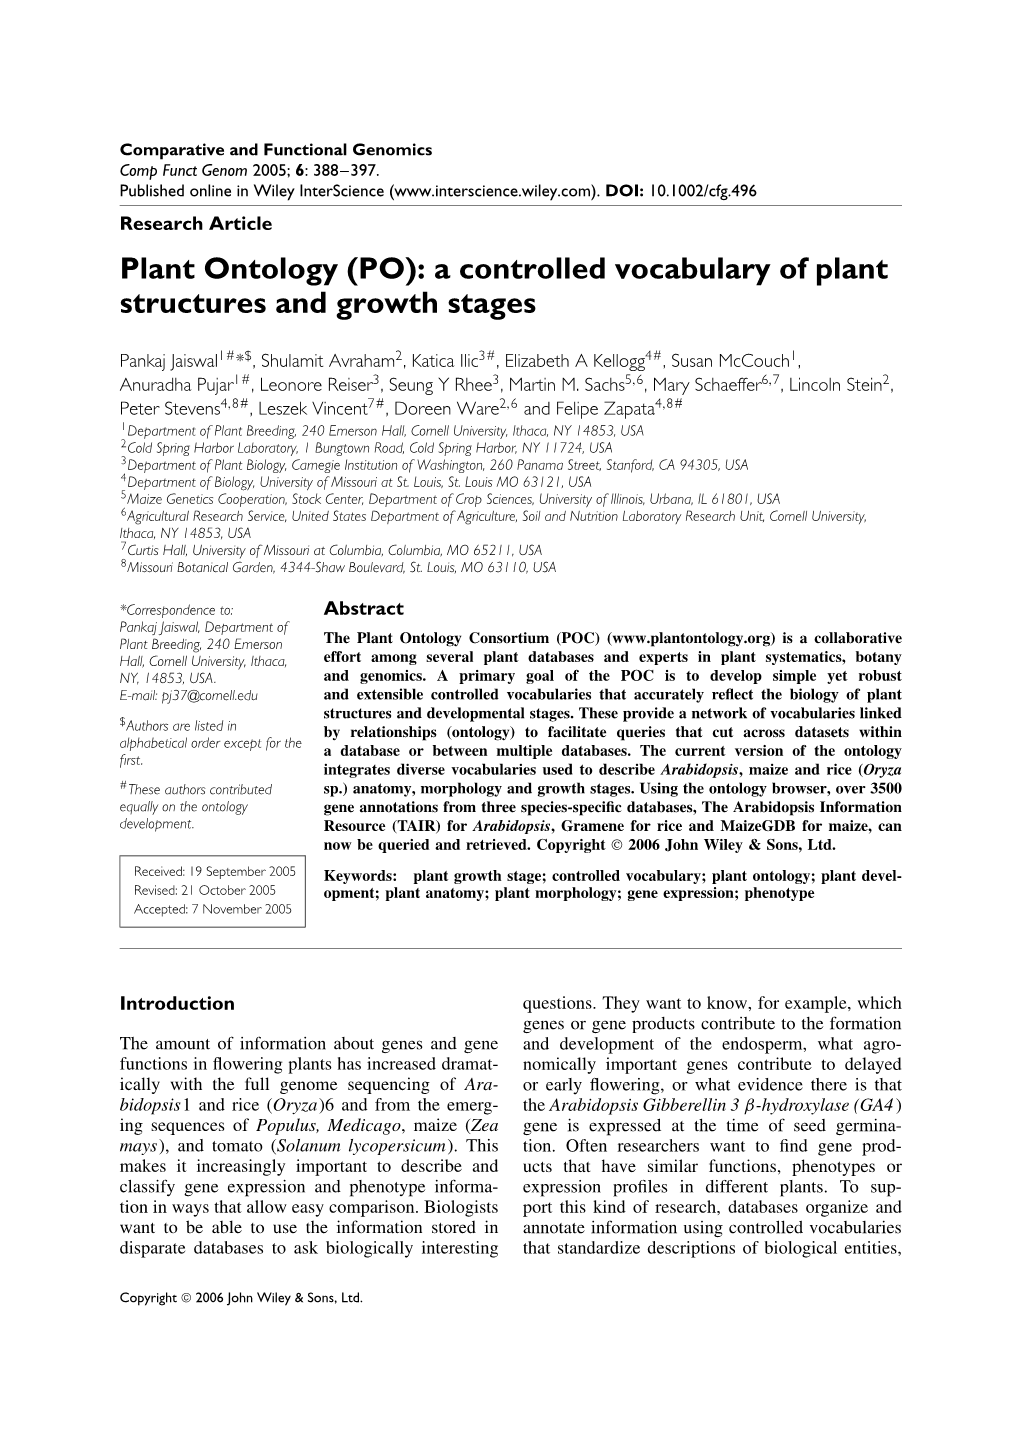 (PO): a Controlled Vocabulary of Plant Structures and Growth Stages